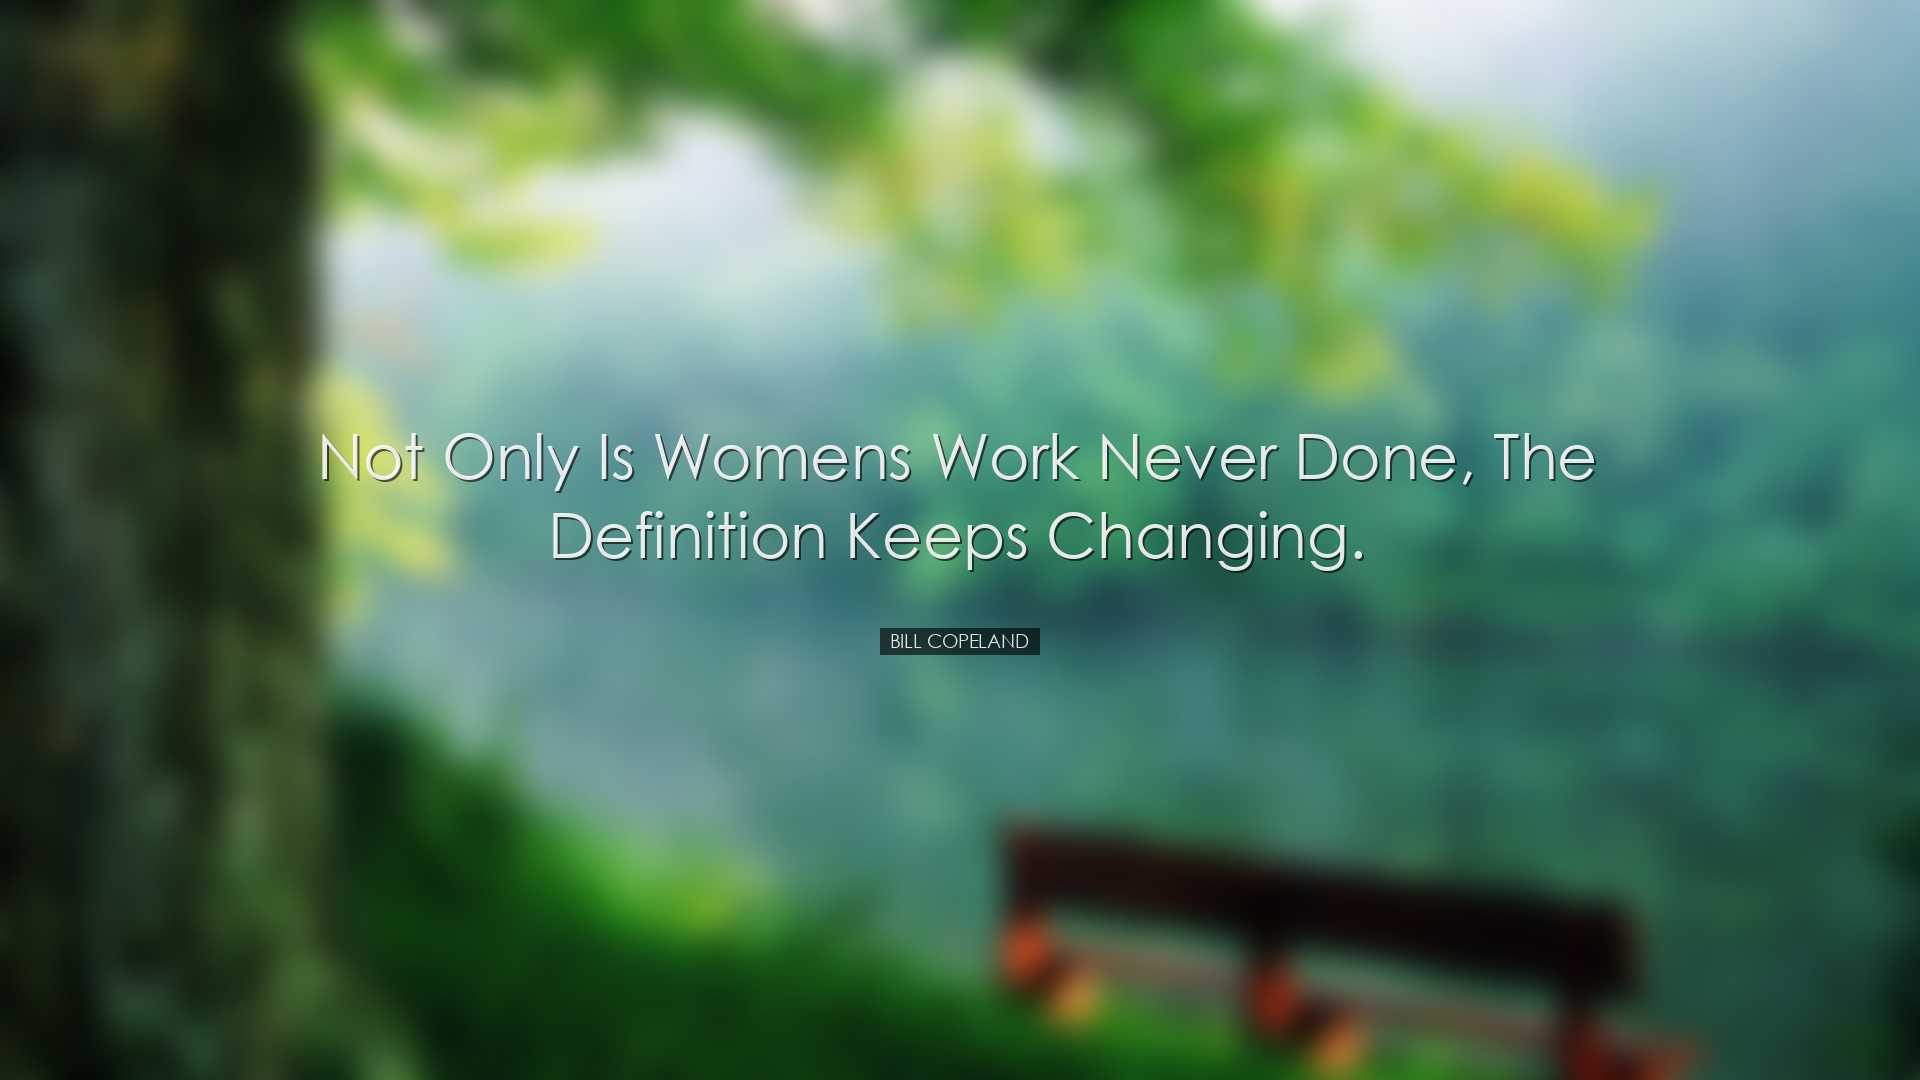 Not only is womens work never done, the definition keeps changing.